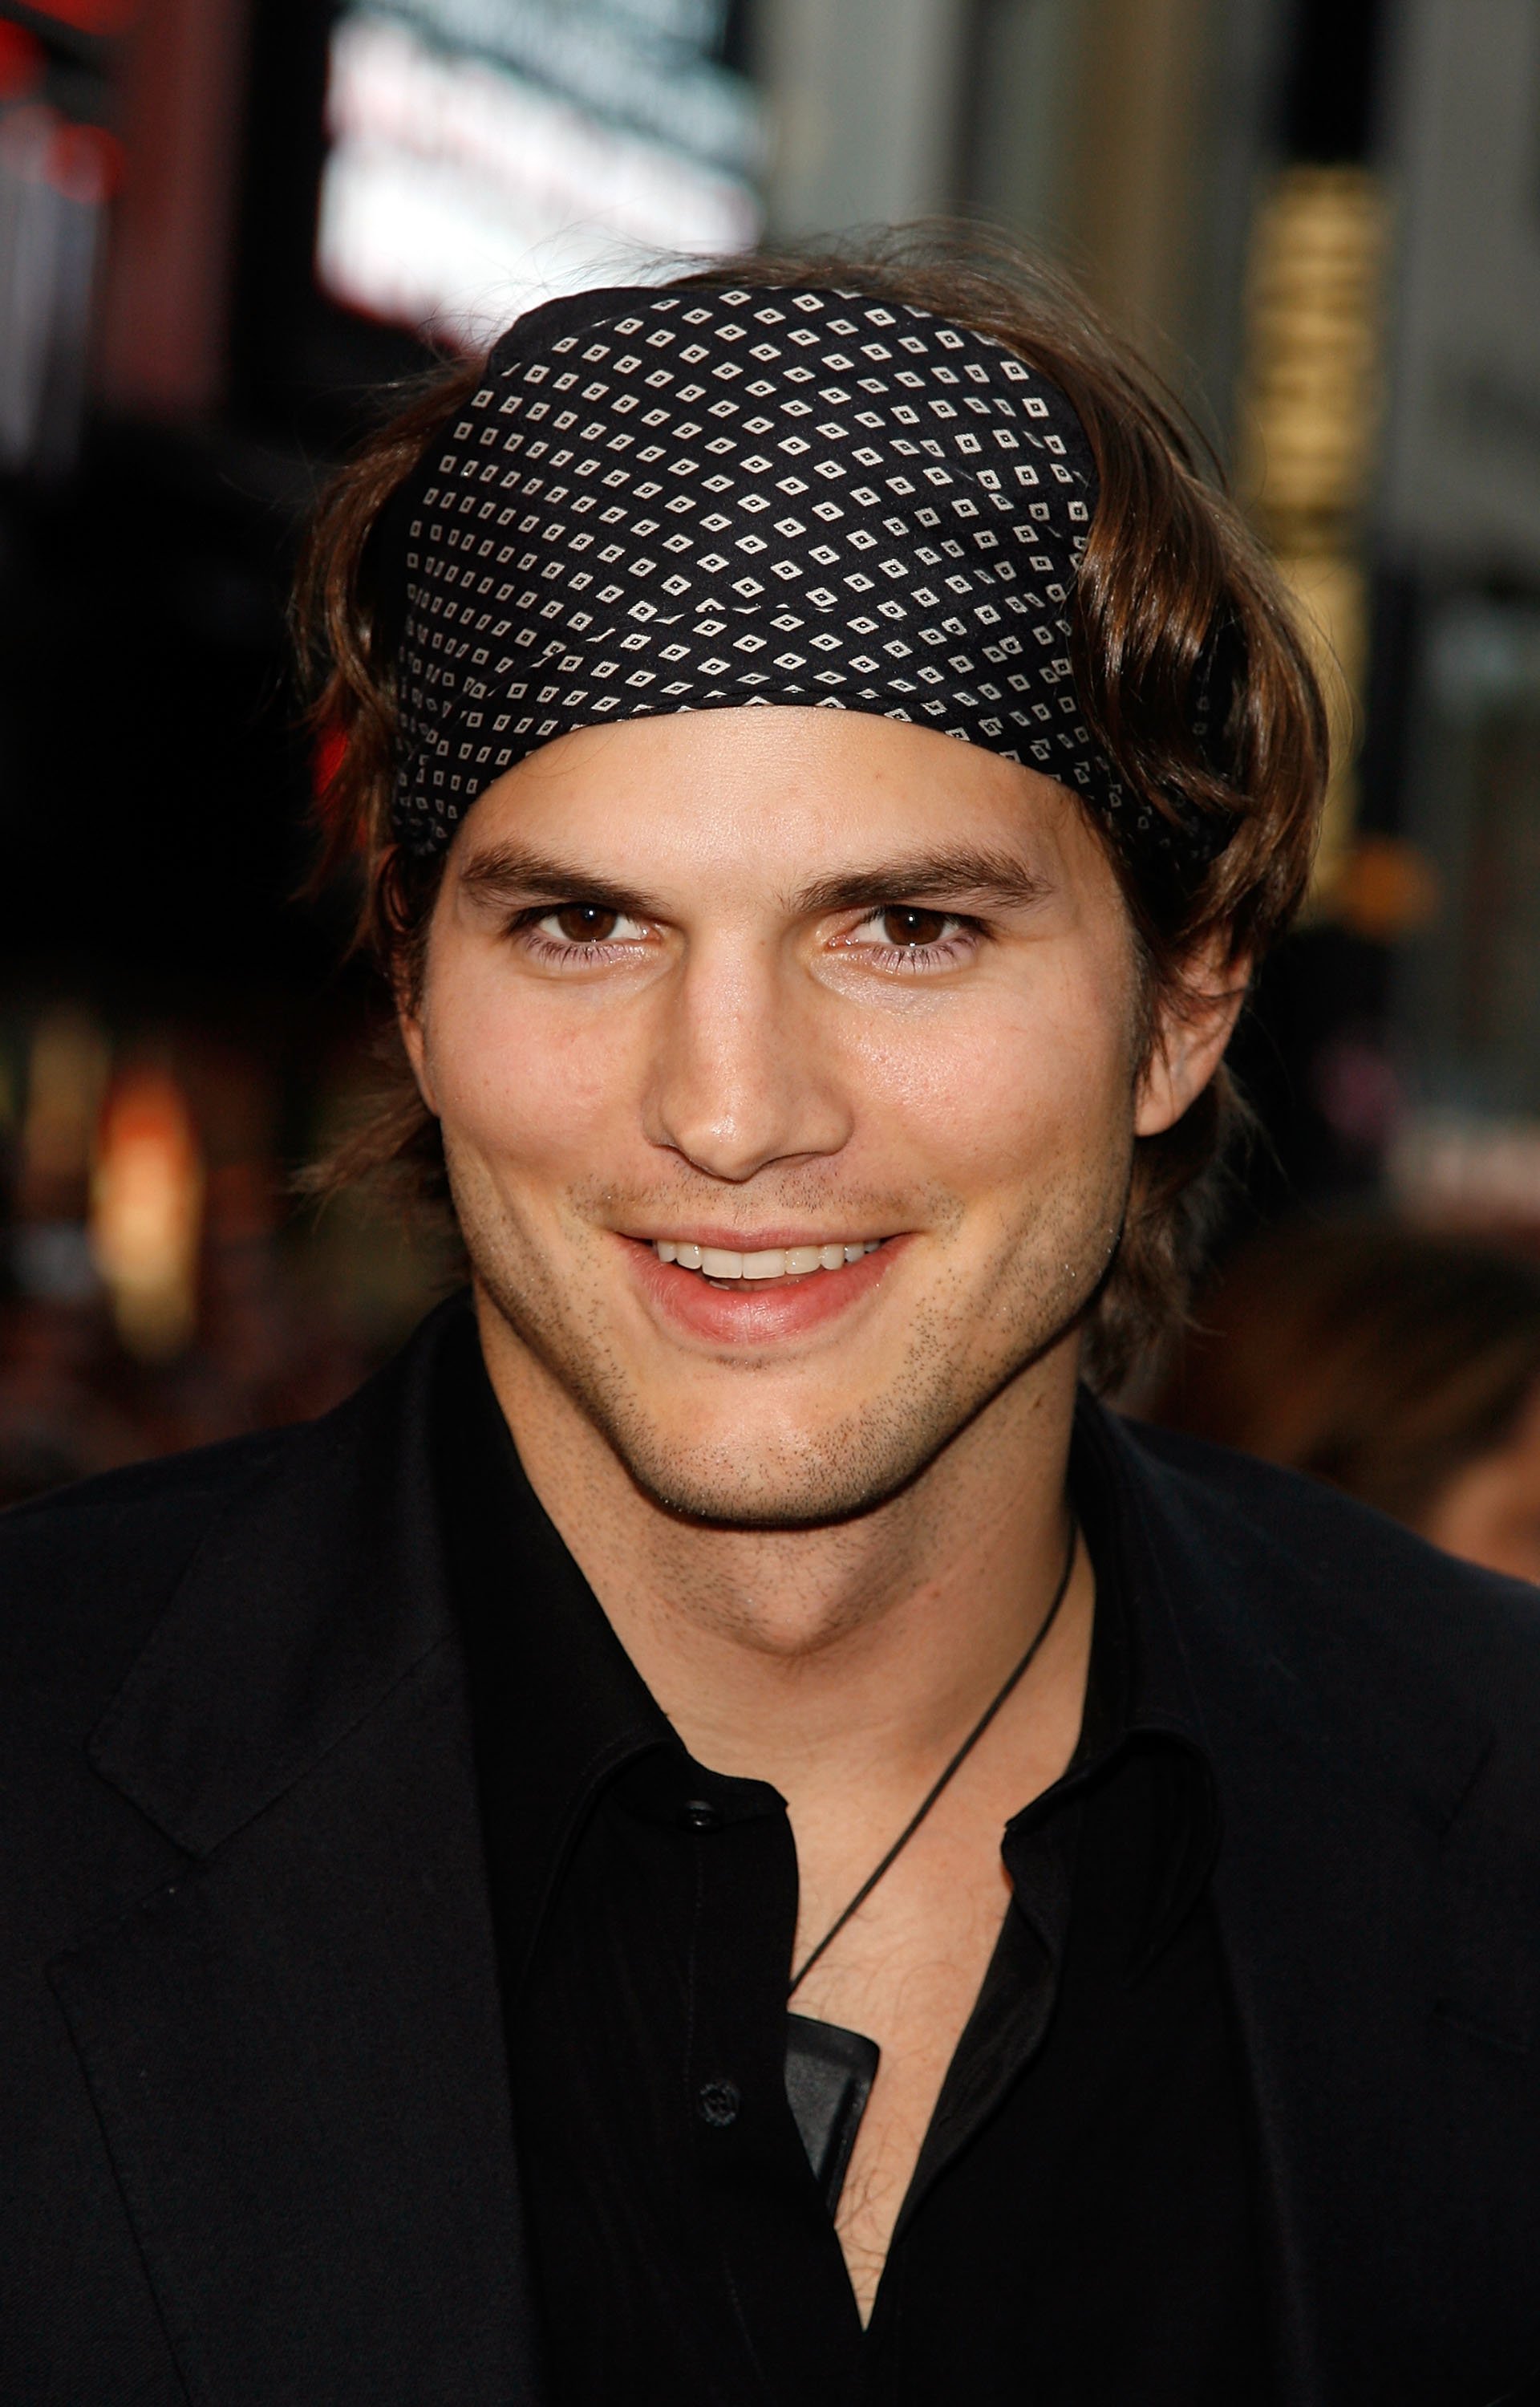 Ashton Kutcher arrives at the Los Angeles premiere of "Mr. Brooks" at Grauman's Chinese Theater on May 22, 2007, in Los Angeles, California. | Source: Getty Images